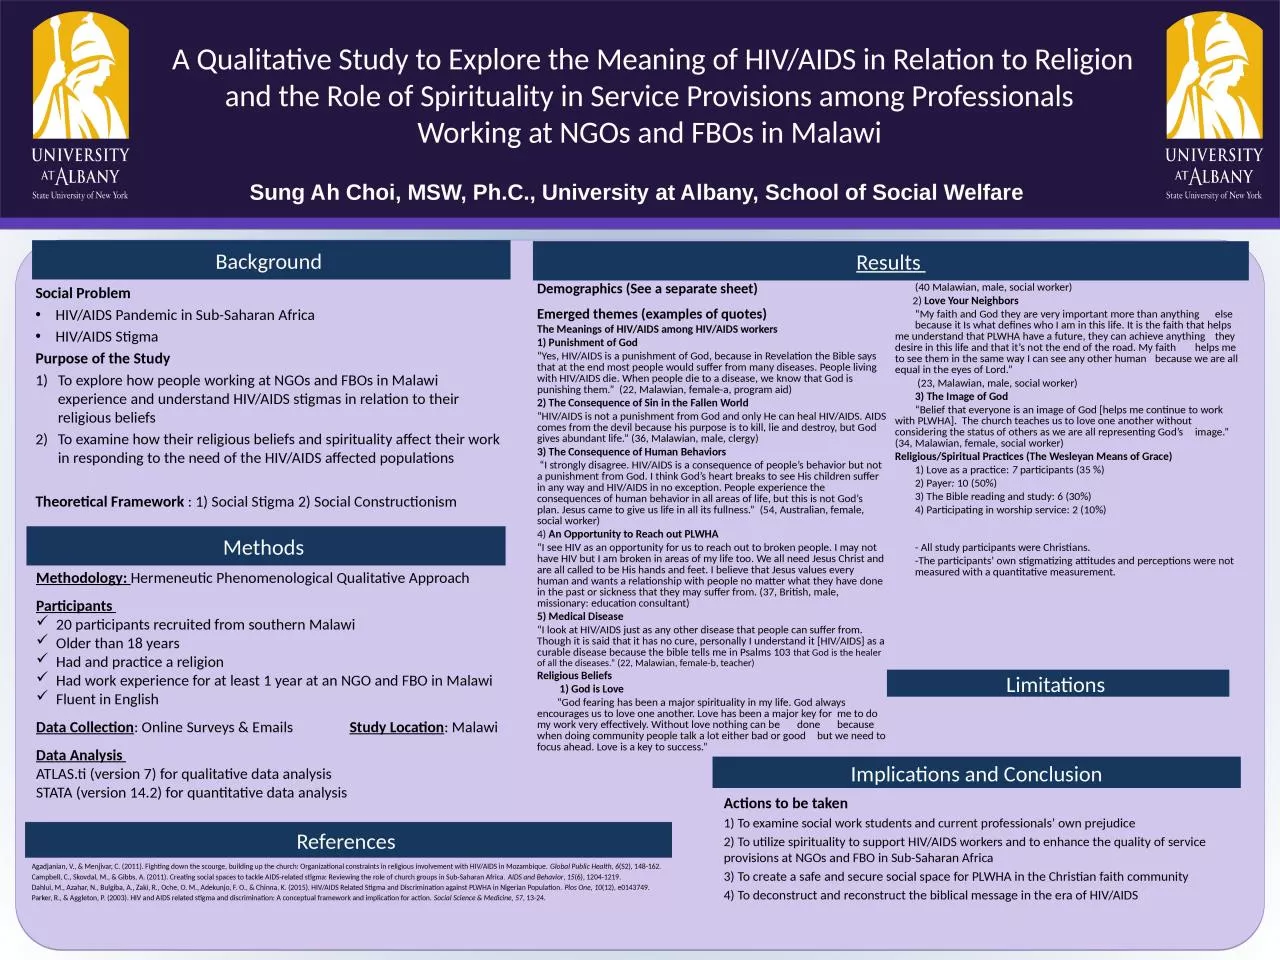 A Qualitative Study to Explore the Meaning of HIV/AIDS in Relation to Religion and the